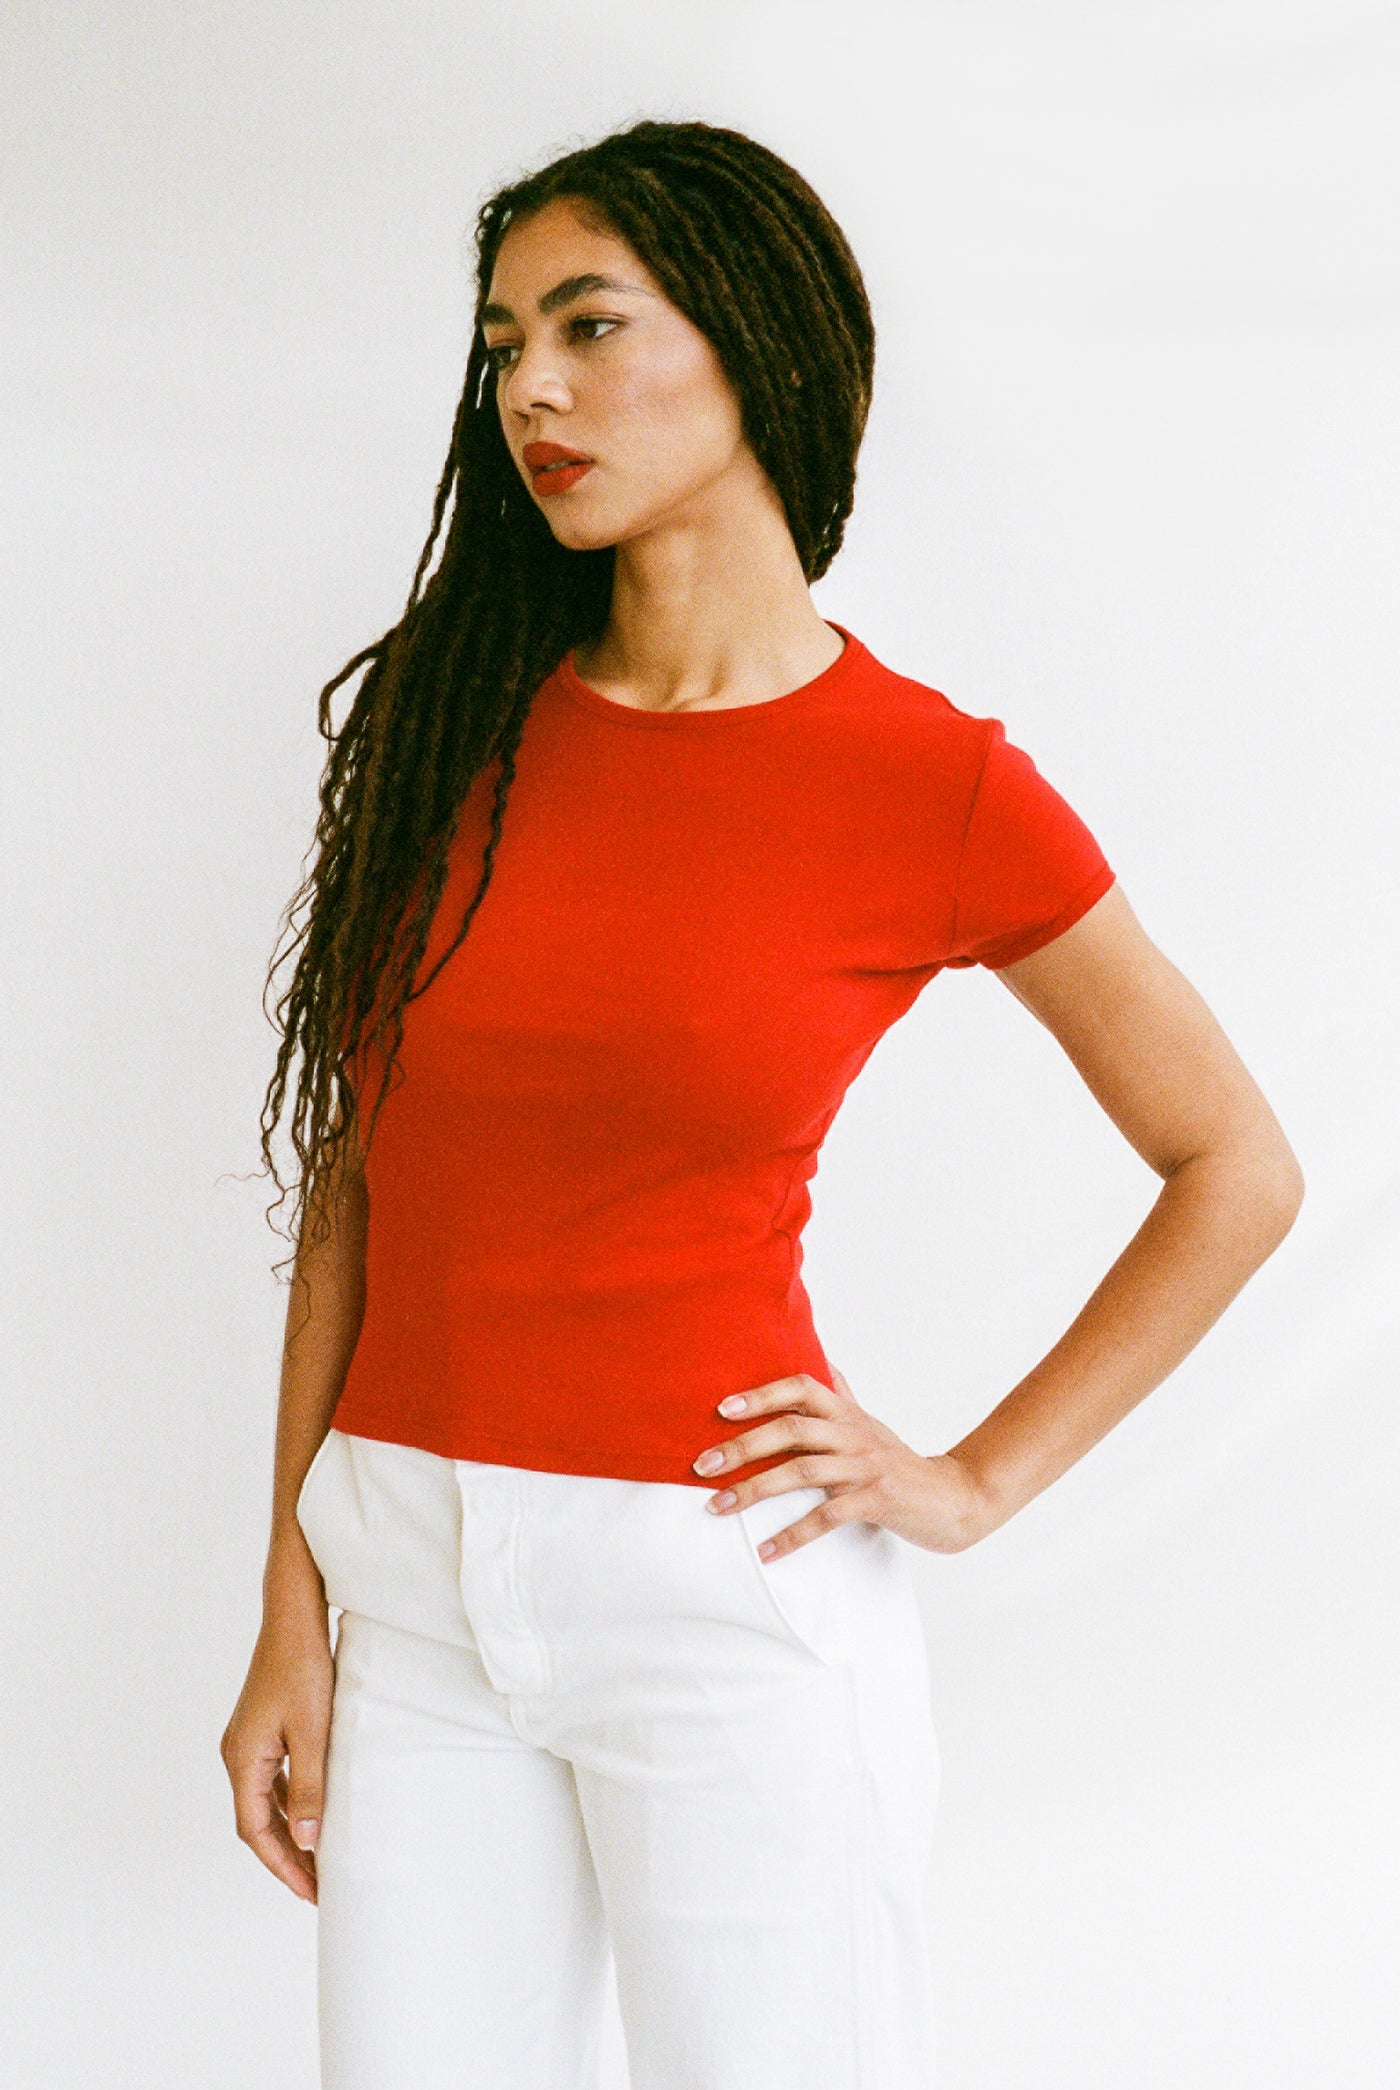 Bellevue Tee in Tomate by Gil Rodriguez http://www.shoprecital.com